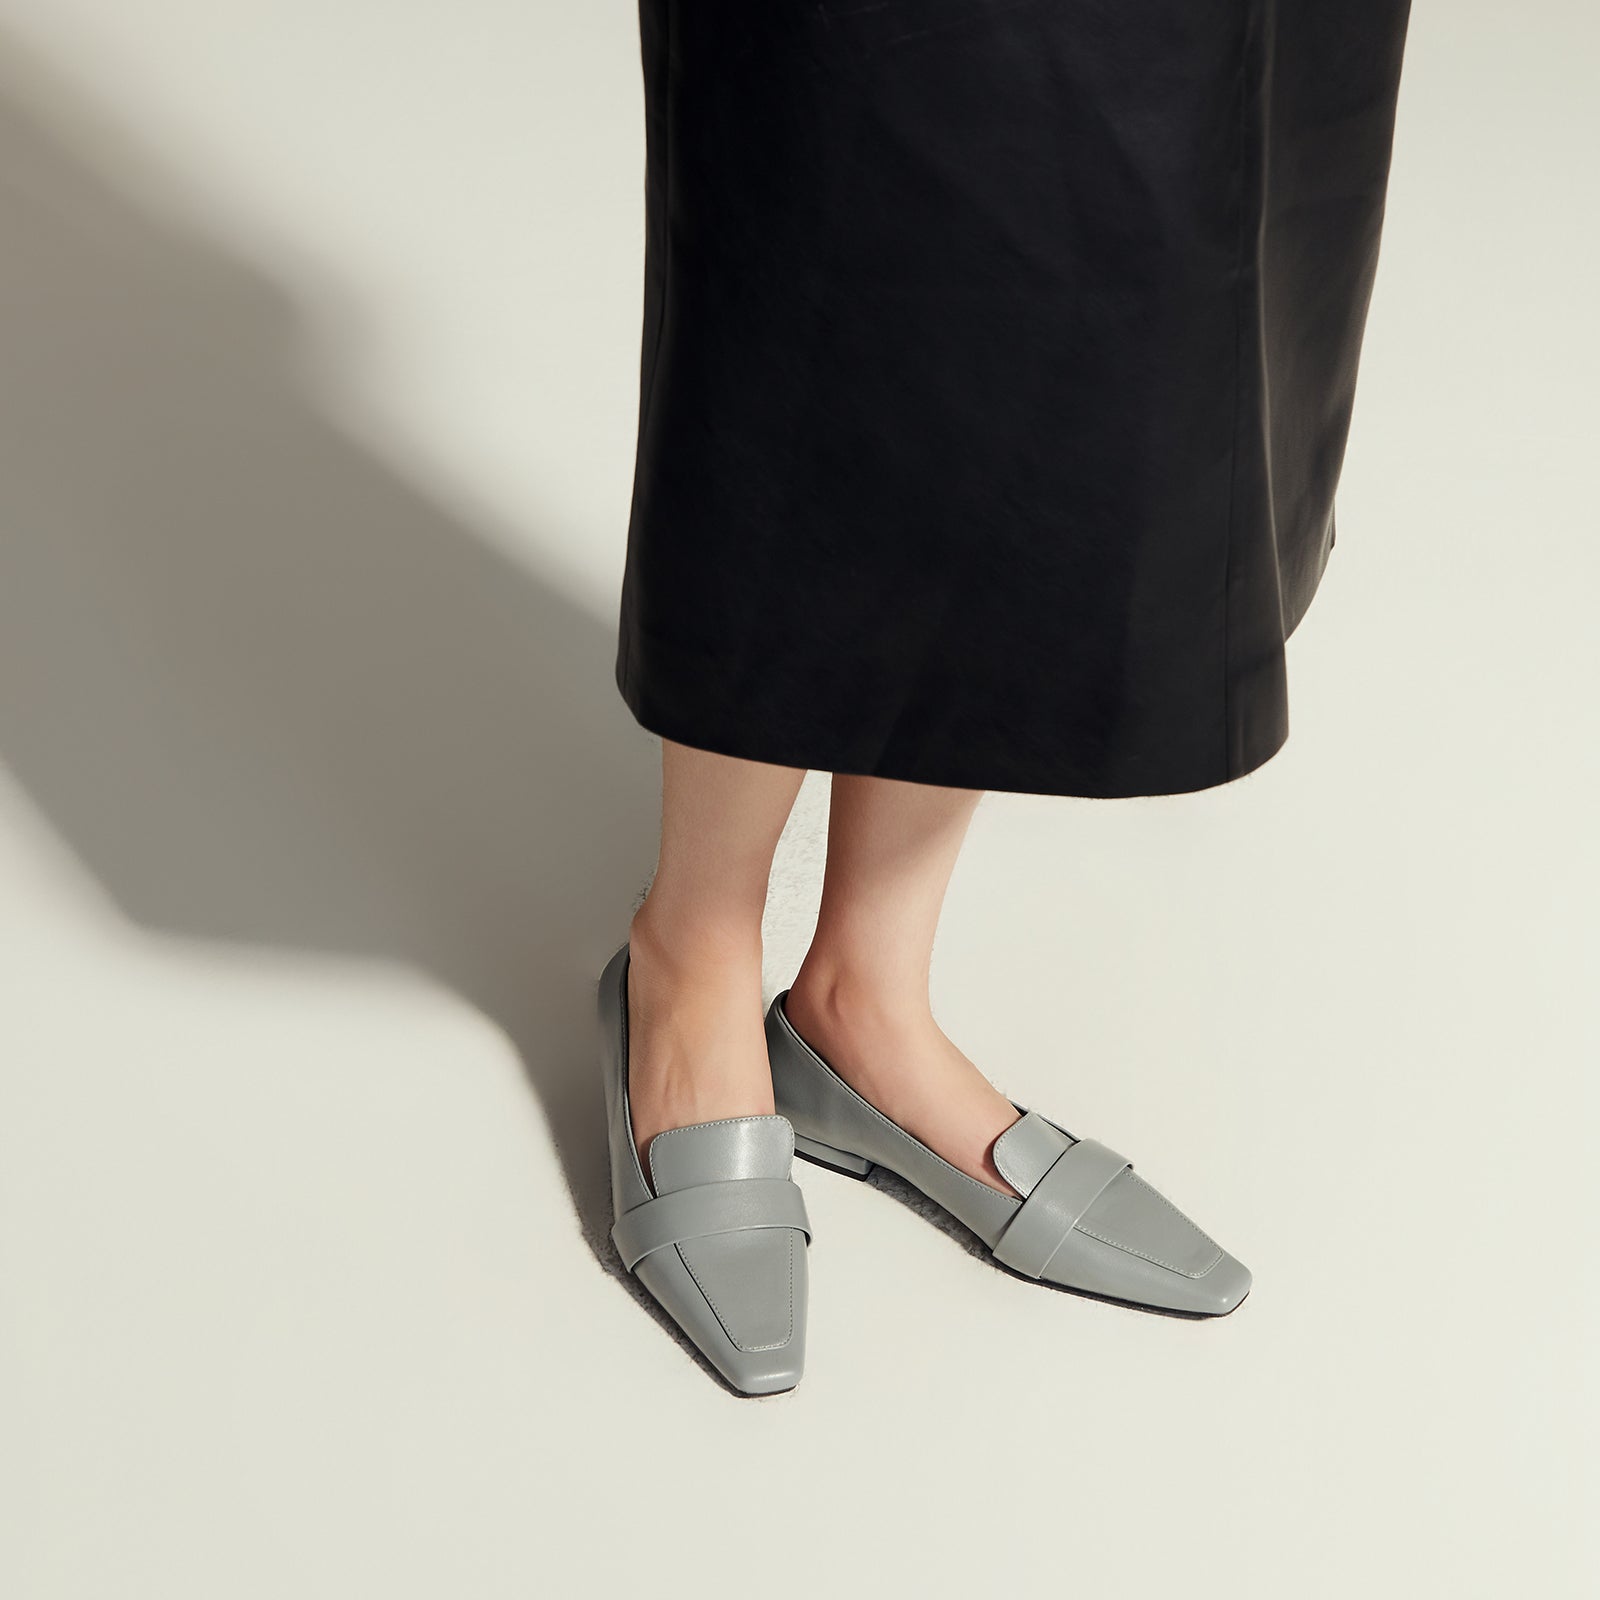 Penny Strap Platform Loafers in Blue, a timeless and versatile option for sophisticated styling